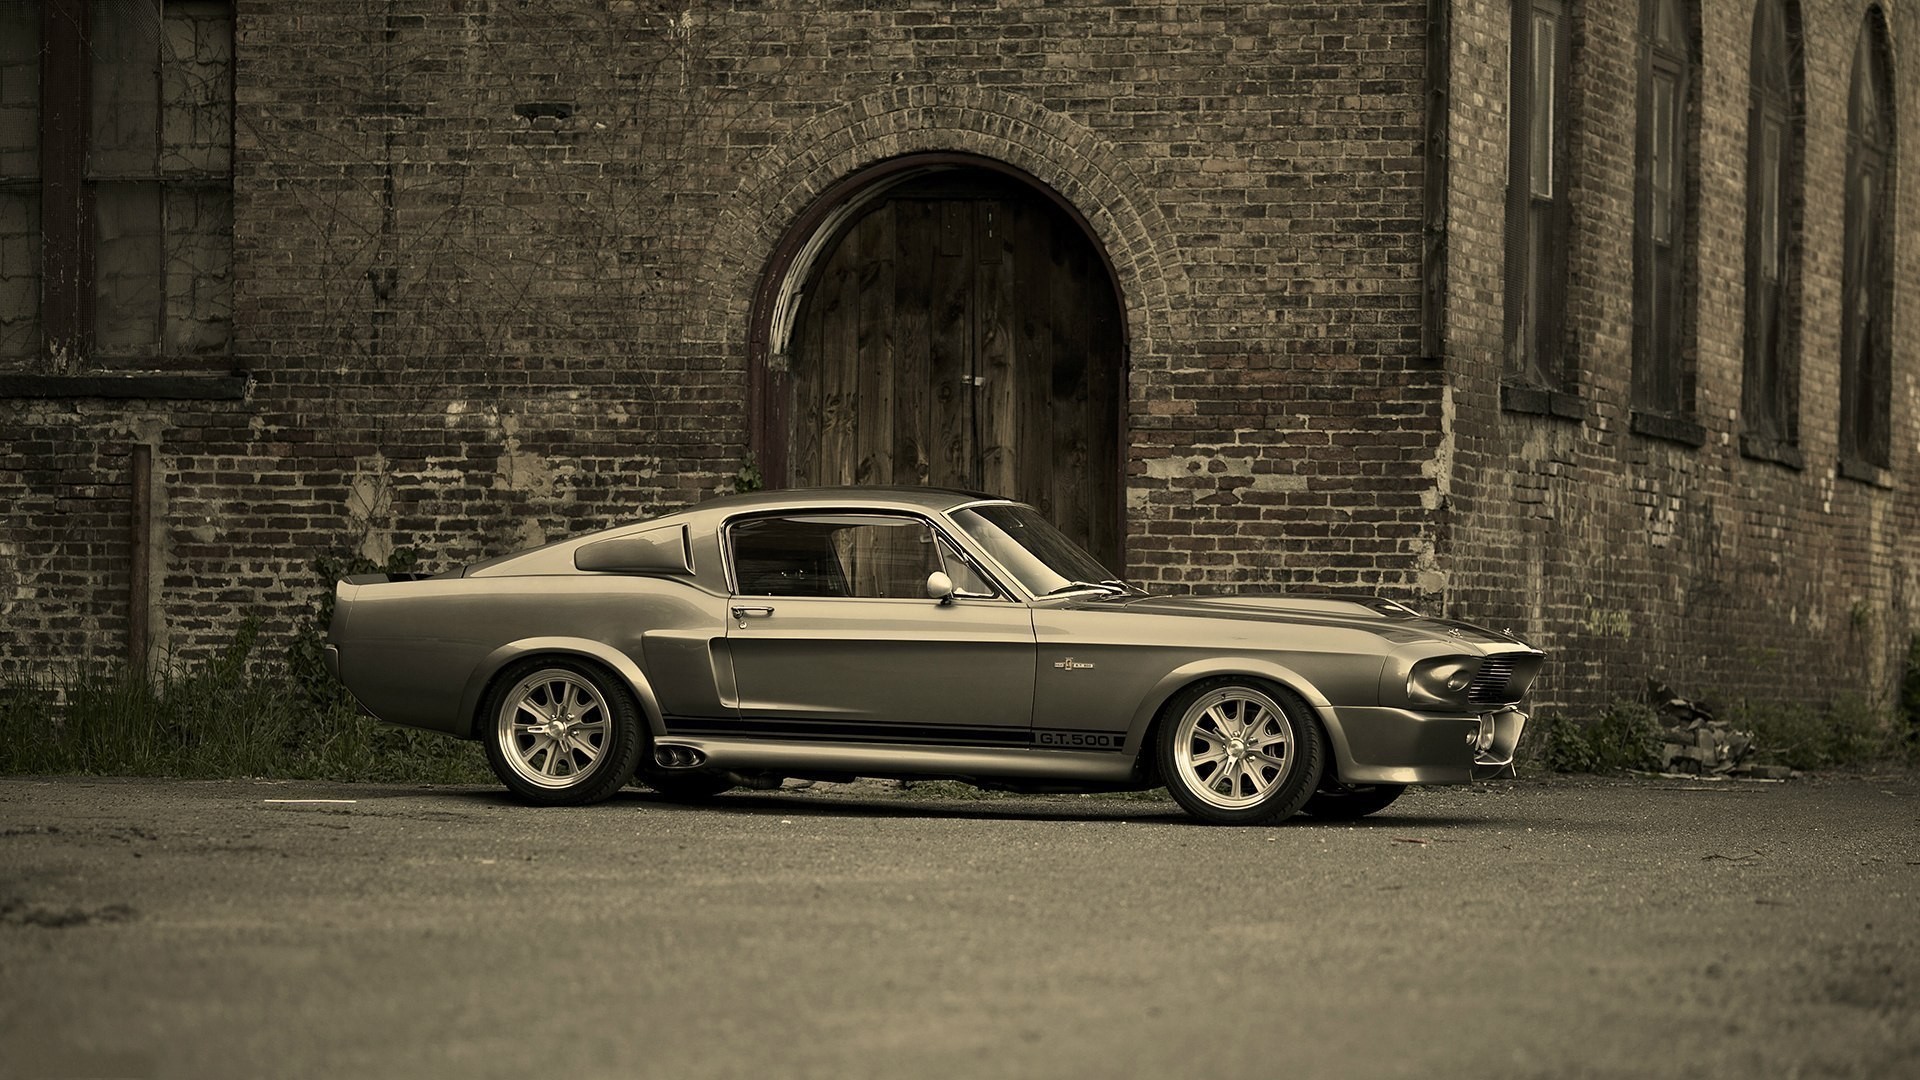 General 1920x1080 car classic car Ford Mustang Shelby Ford gray cars vehicle Ford Mustang